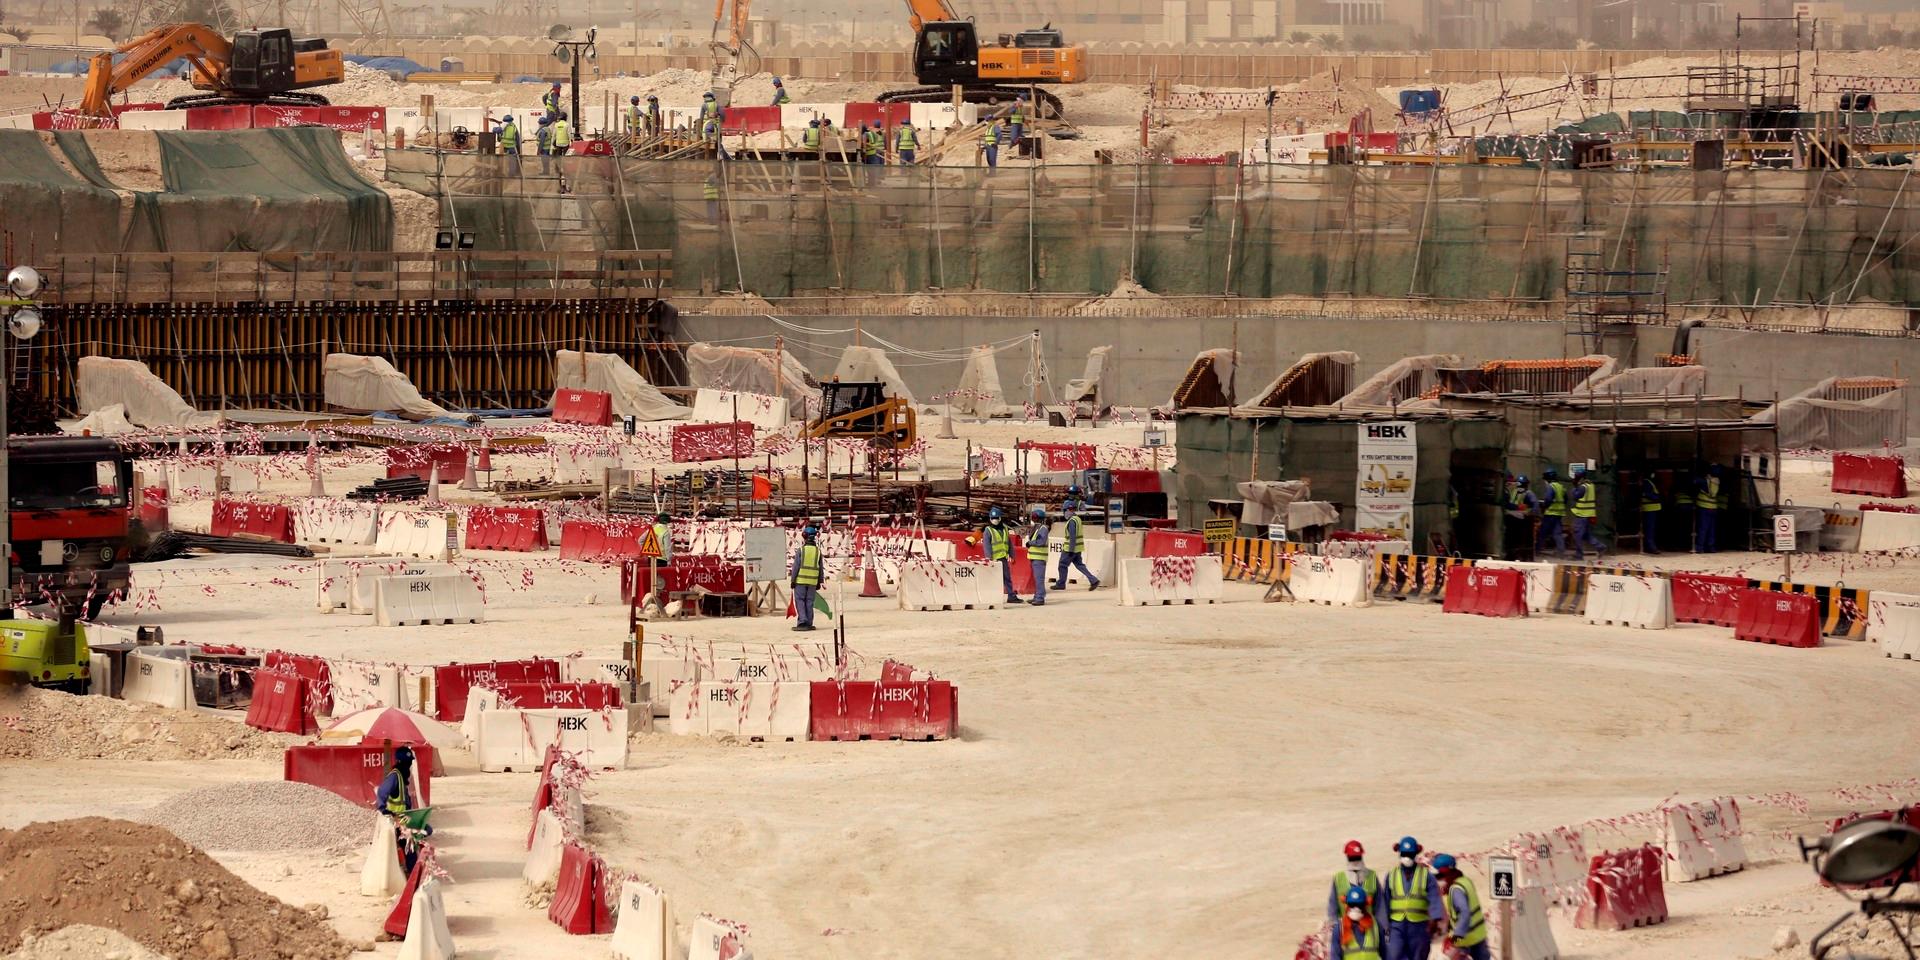  In this photo taken during a government organized media tour, laborers work at the Al-Wakra Stadium that is under construction for the 2022 World Cup, in Doha, Qatar, Monday, May 4, 2015. Qatars top labor official told The Associated Press Monday that Qatars inability to ensure decent housing for its bulging migrant labor population was a mistake the government is working to fix as it prepares to host the 2022 World Cup, vowing his country would improve conditions for its vast foreign labor force. (AP Photo/Maya Alleruzzo)